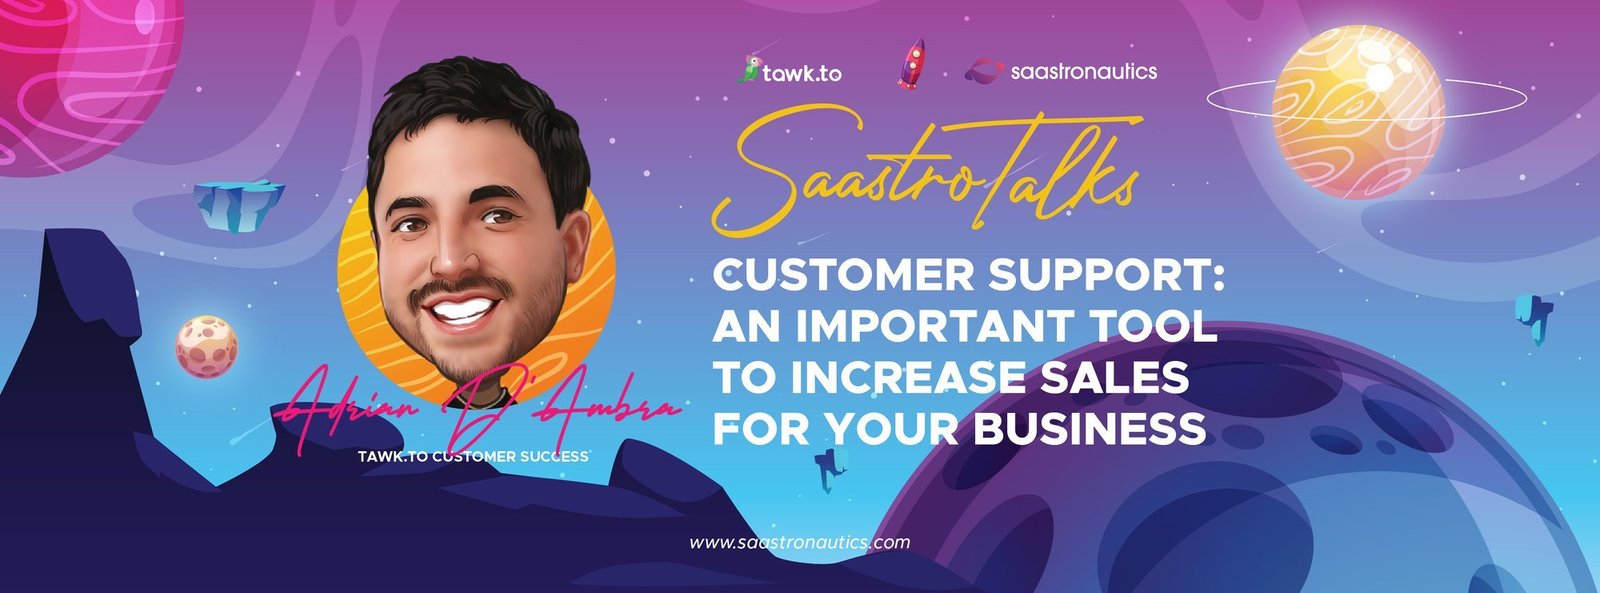 Customer Support: An Important Tool to Increase Sales For Your Business